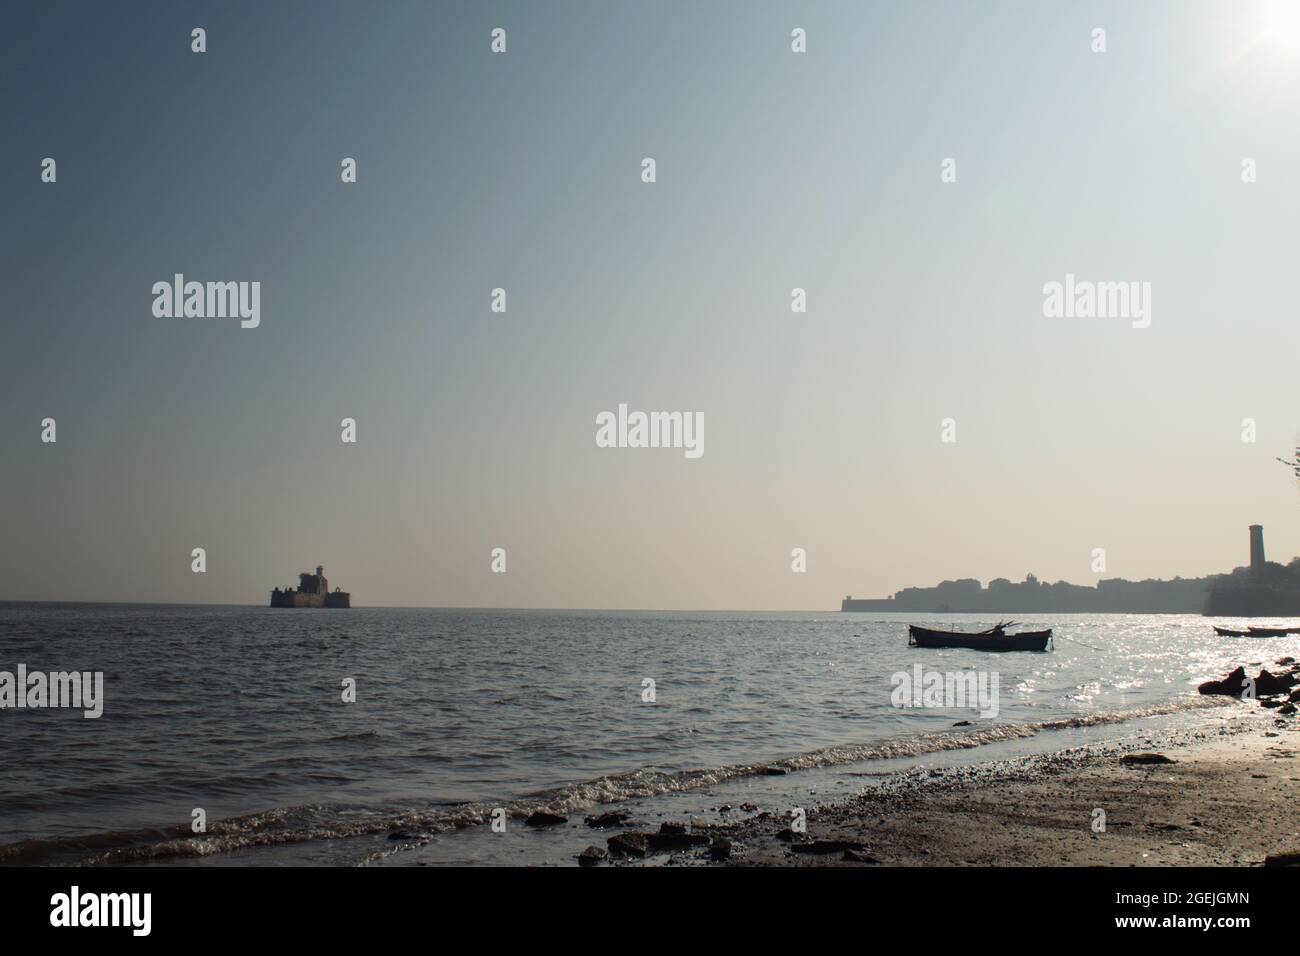 View of the Arabian sea from a sandy beach. Silhouette of the boat, the Lighthouse and the City are visible on the bright sunny day, Diu, India. Stock Photo